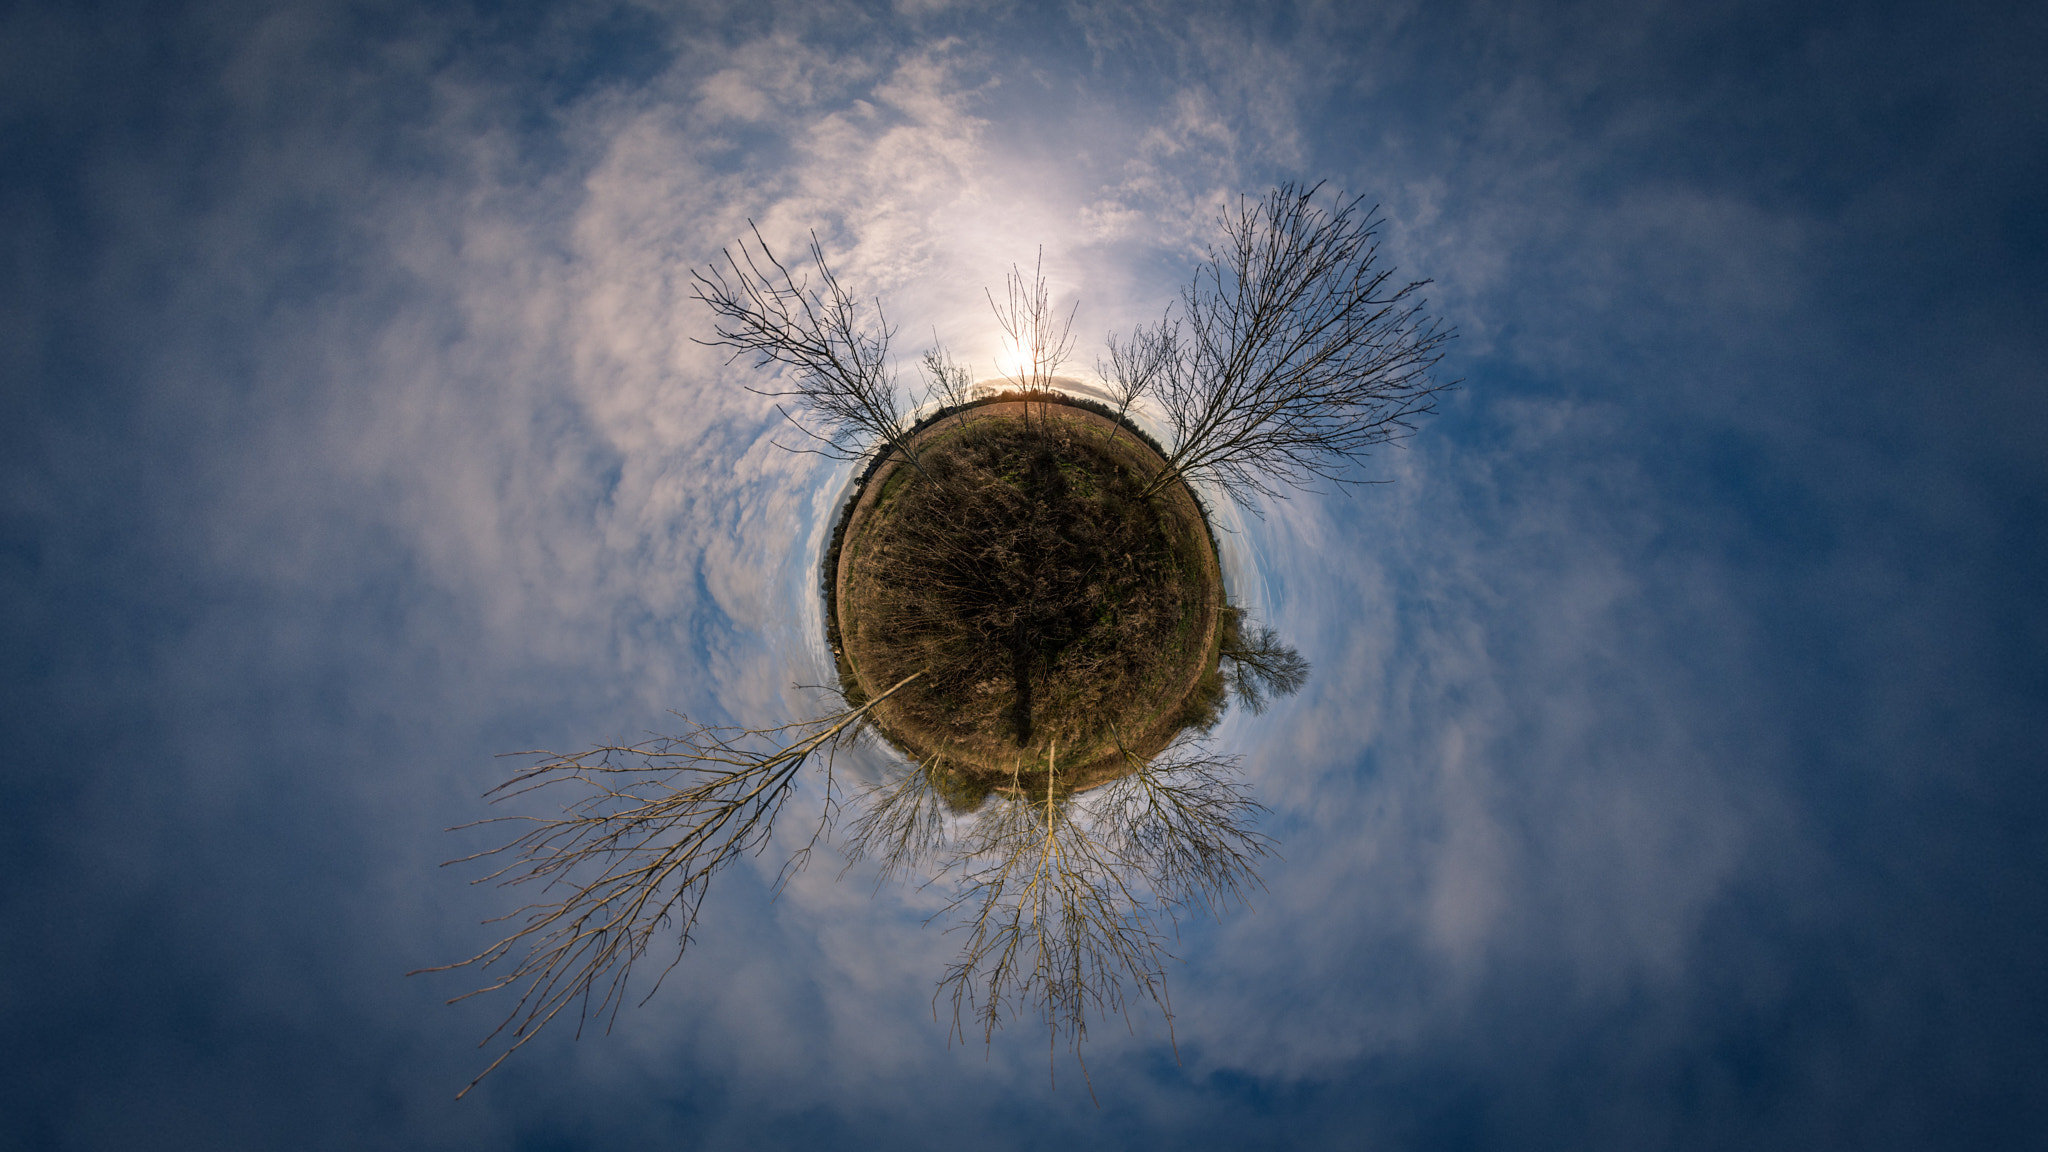 Nikon D7200 sample photo. Little planet trees and sun photography